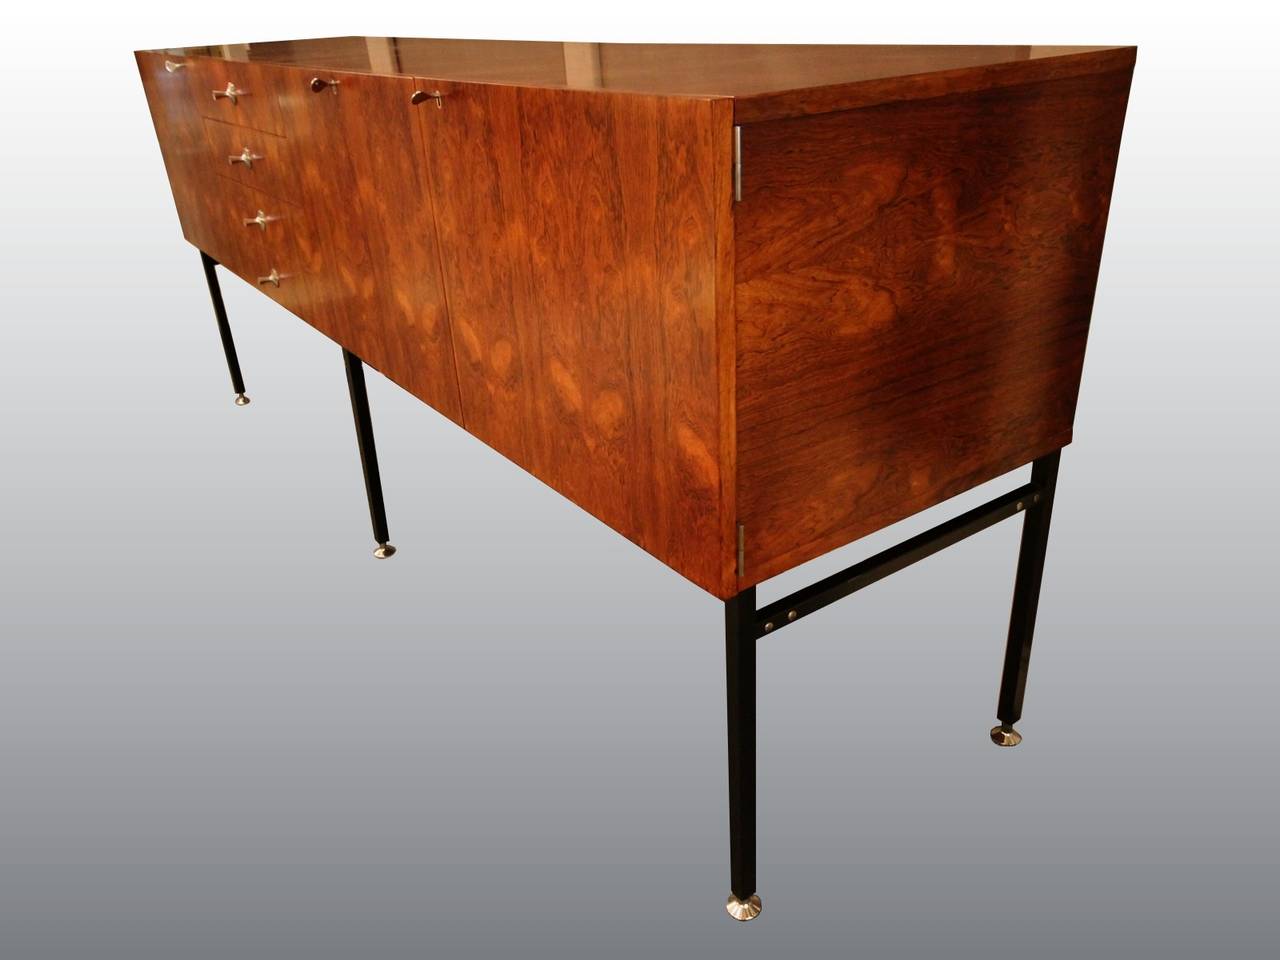 Large Alain Richard beautiful sideboard 802 model, edited in 1957-1958 by Meubles TV. Six adjustable feet. Four drawers, two storage areas with glass shelfs and one bar area with shelve & tray in glass and oak drawer.

Black lacquered metal,